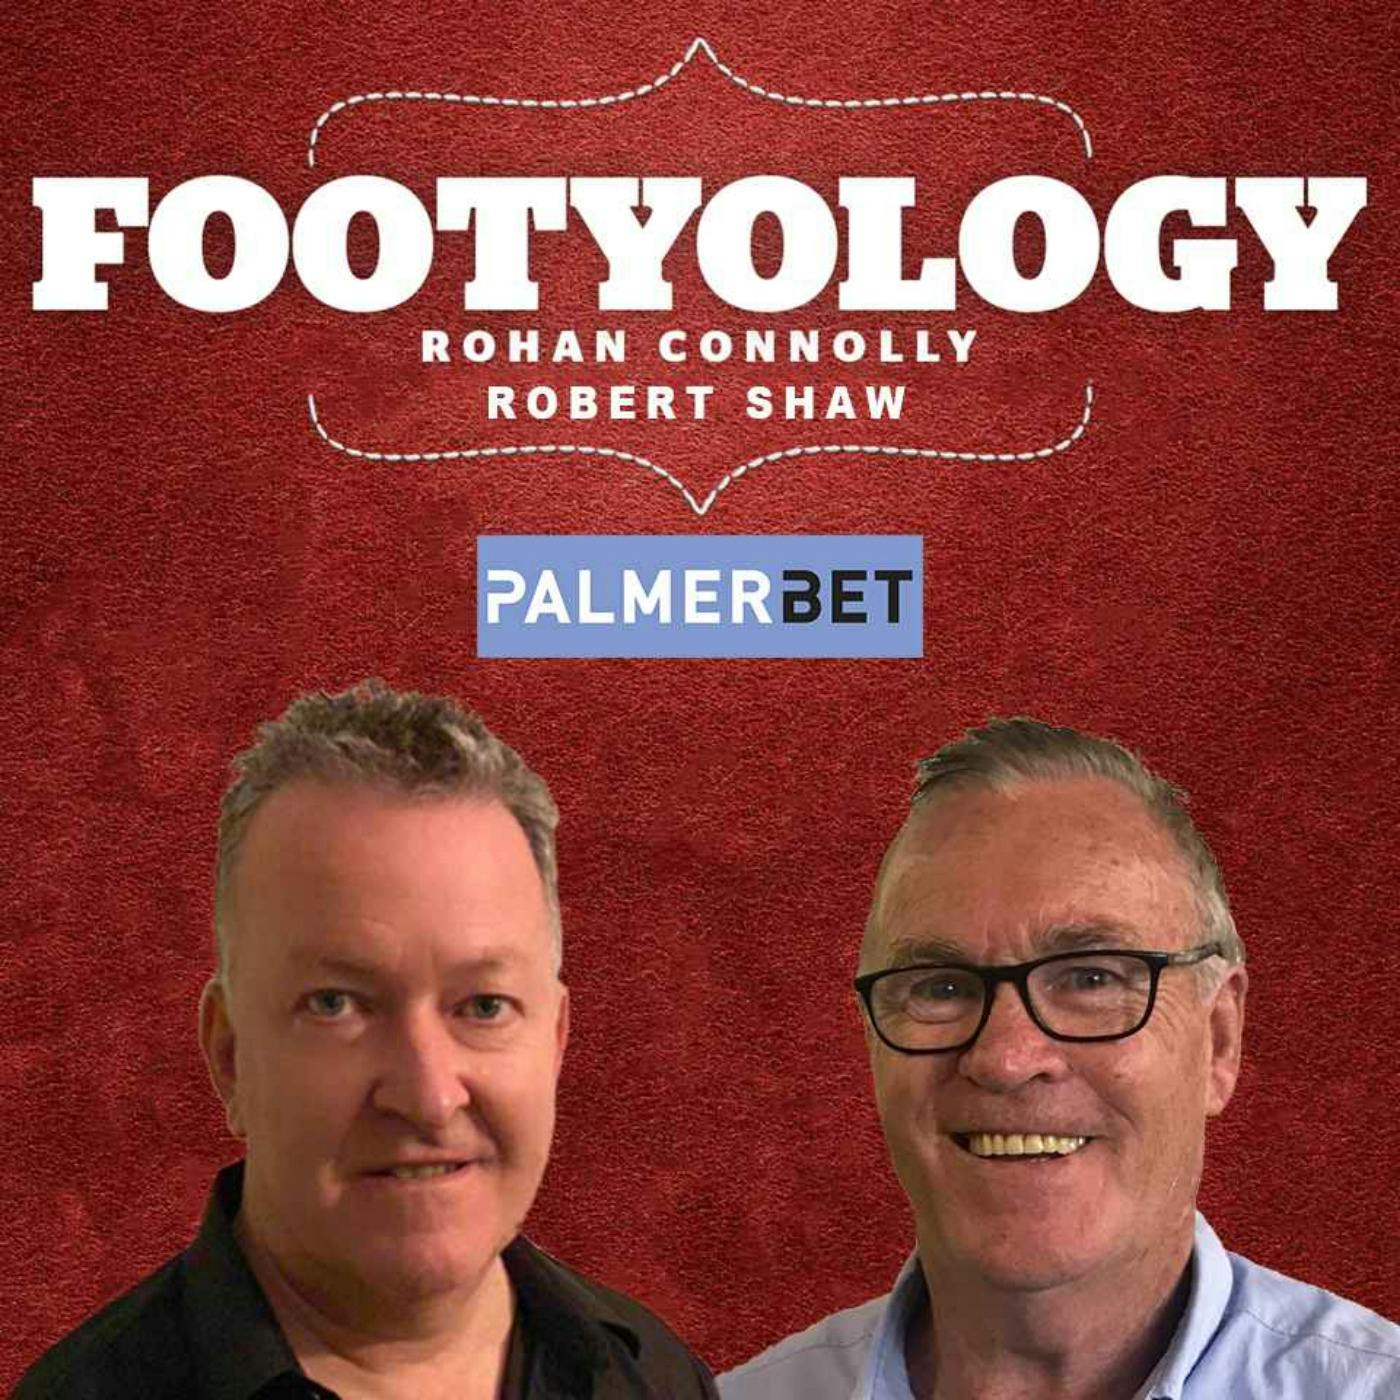 Footyology Podcast - June 1st 2022